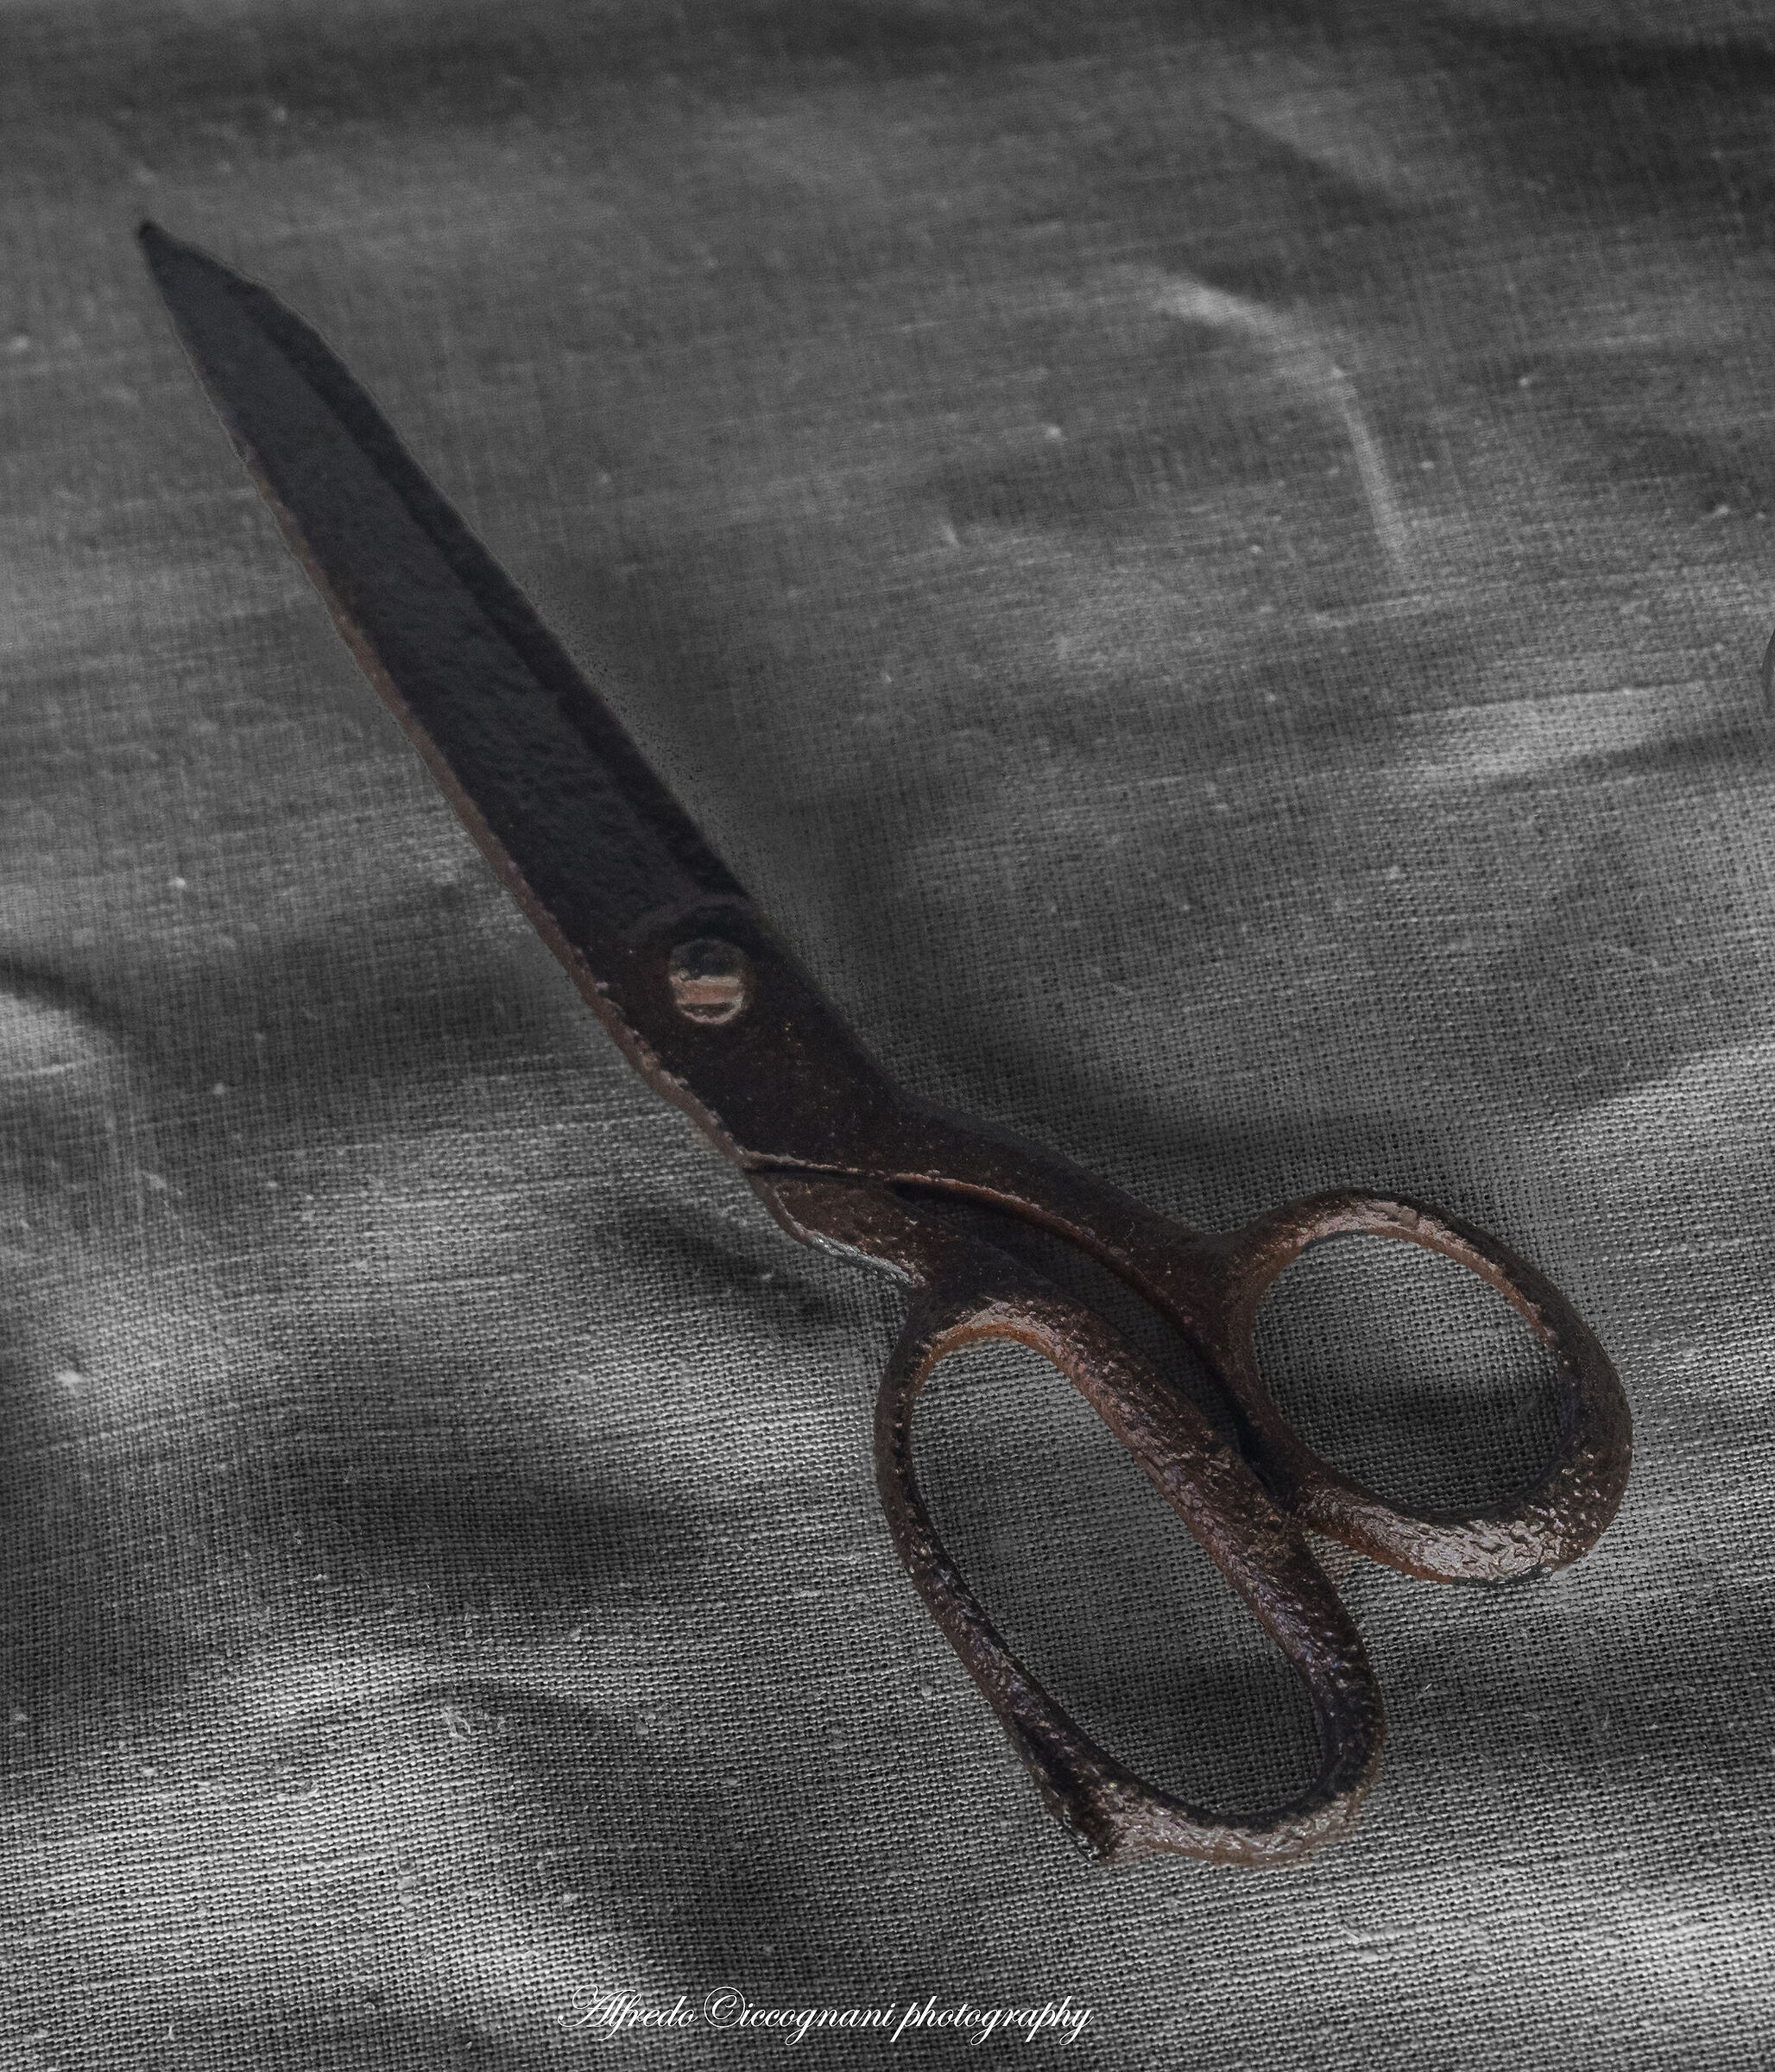 A scissors between personal effects...